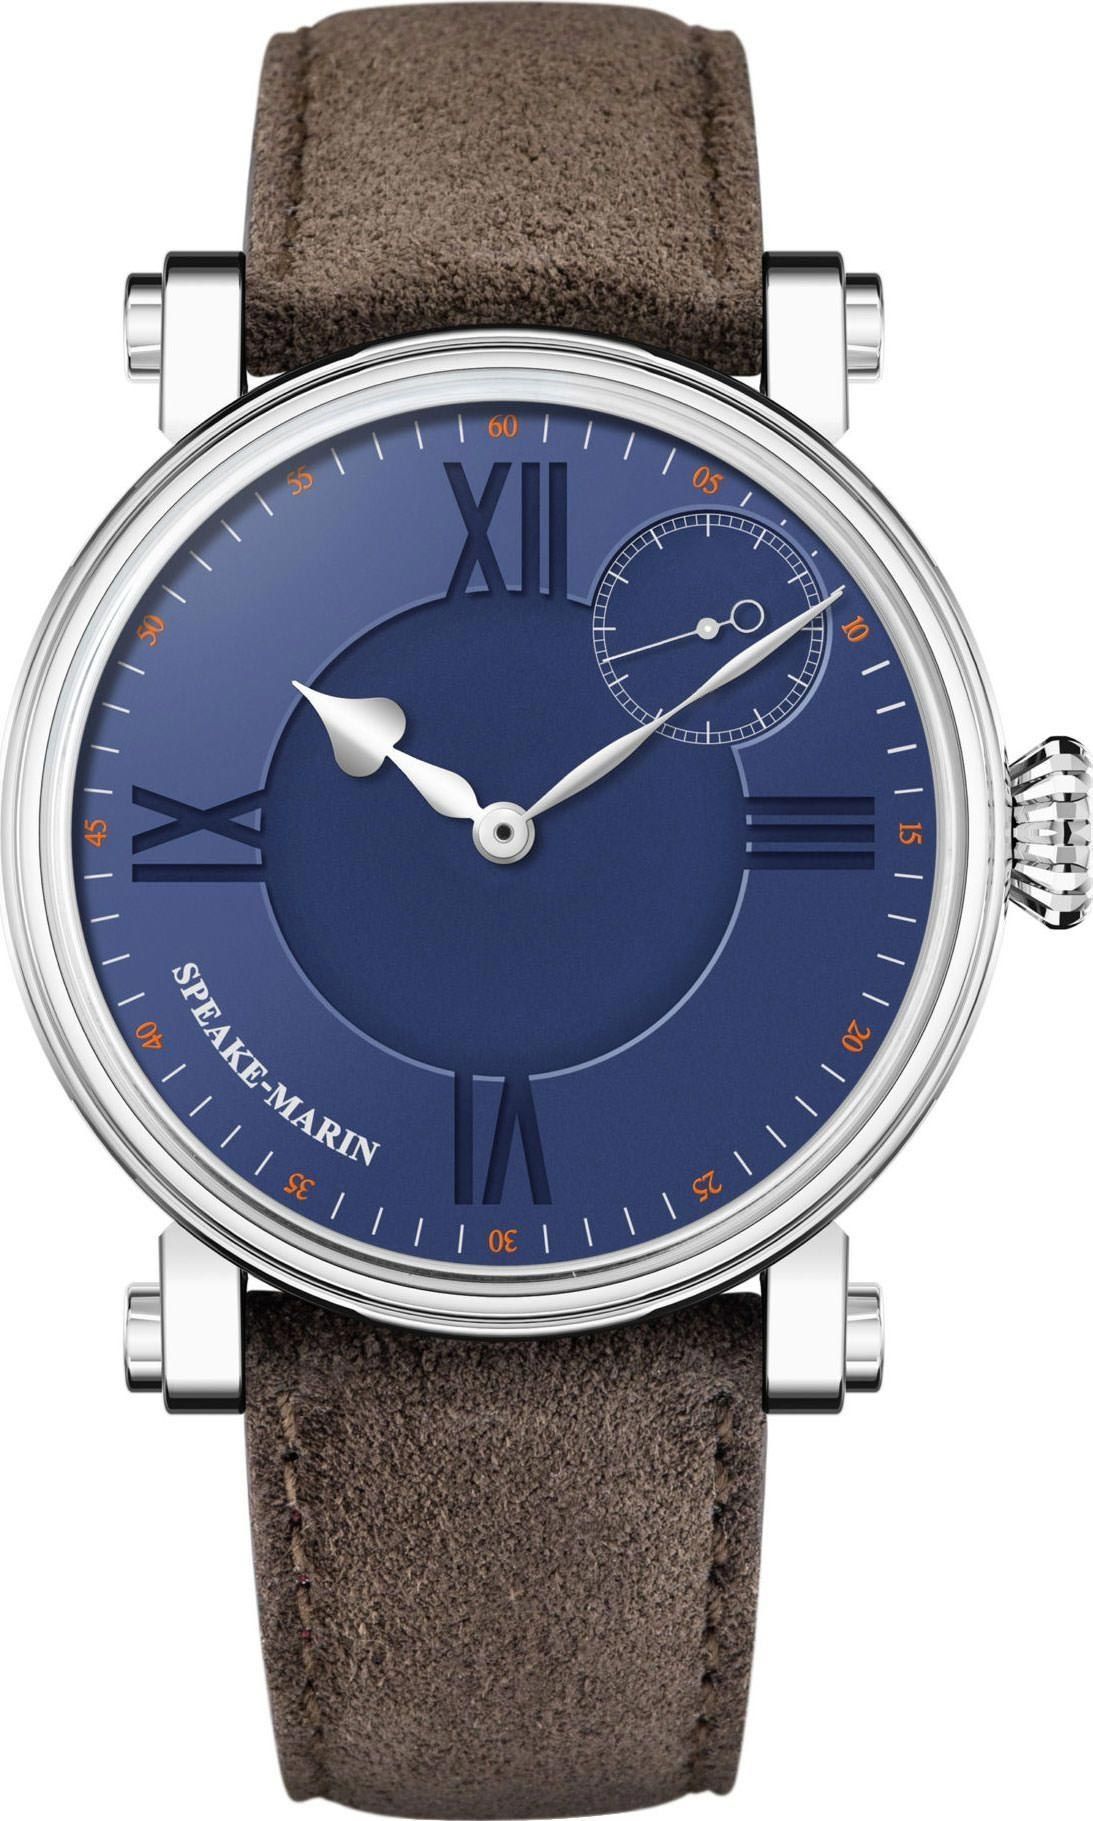 Speake-Marin One & Two Academic Blue Dial 38 mm Automatic Watch For Men - 1